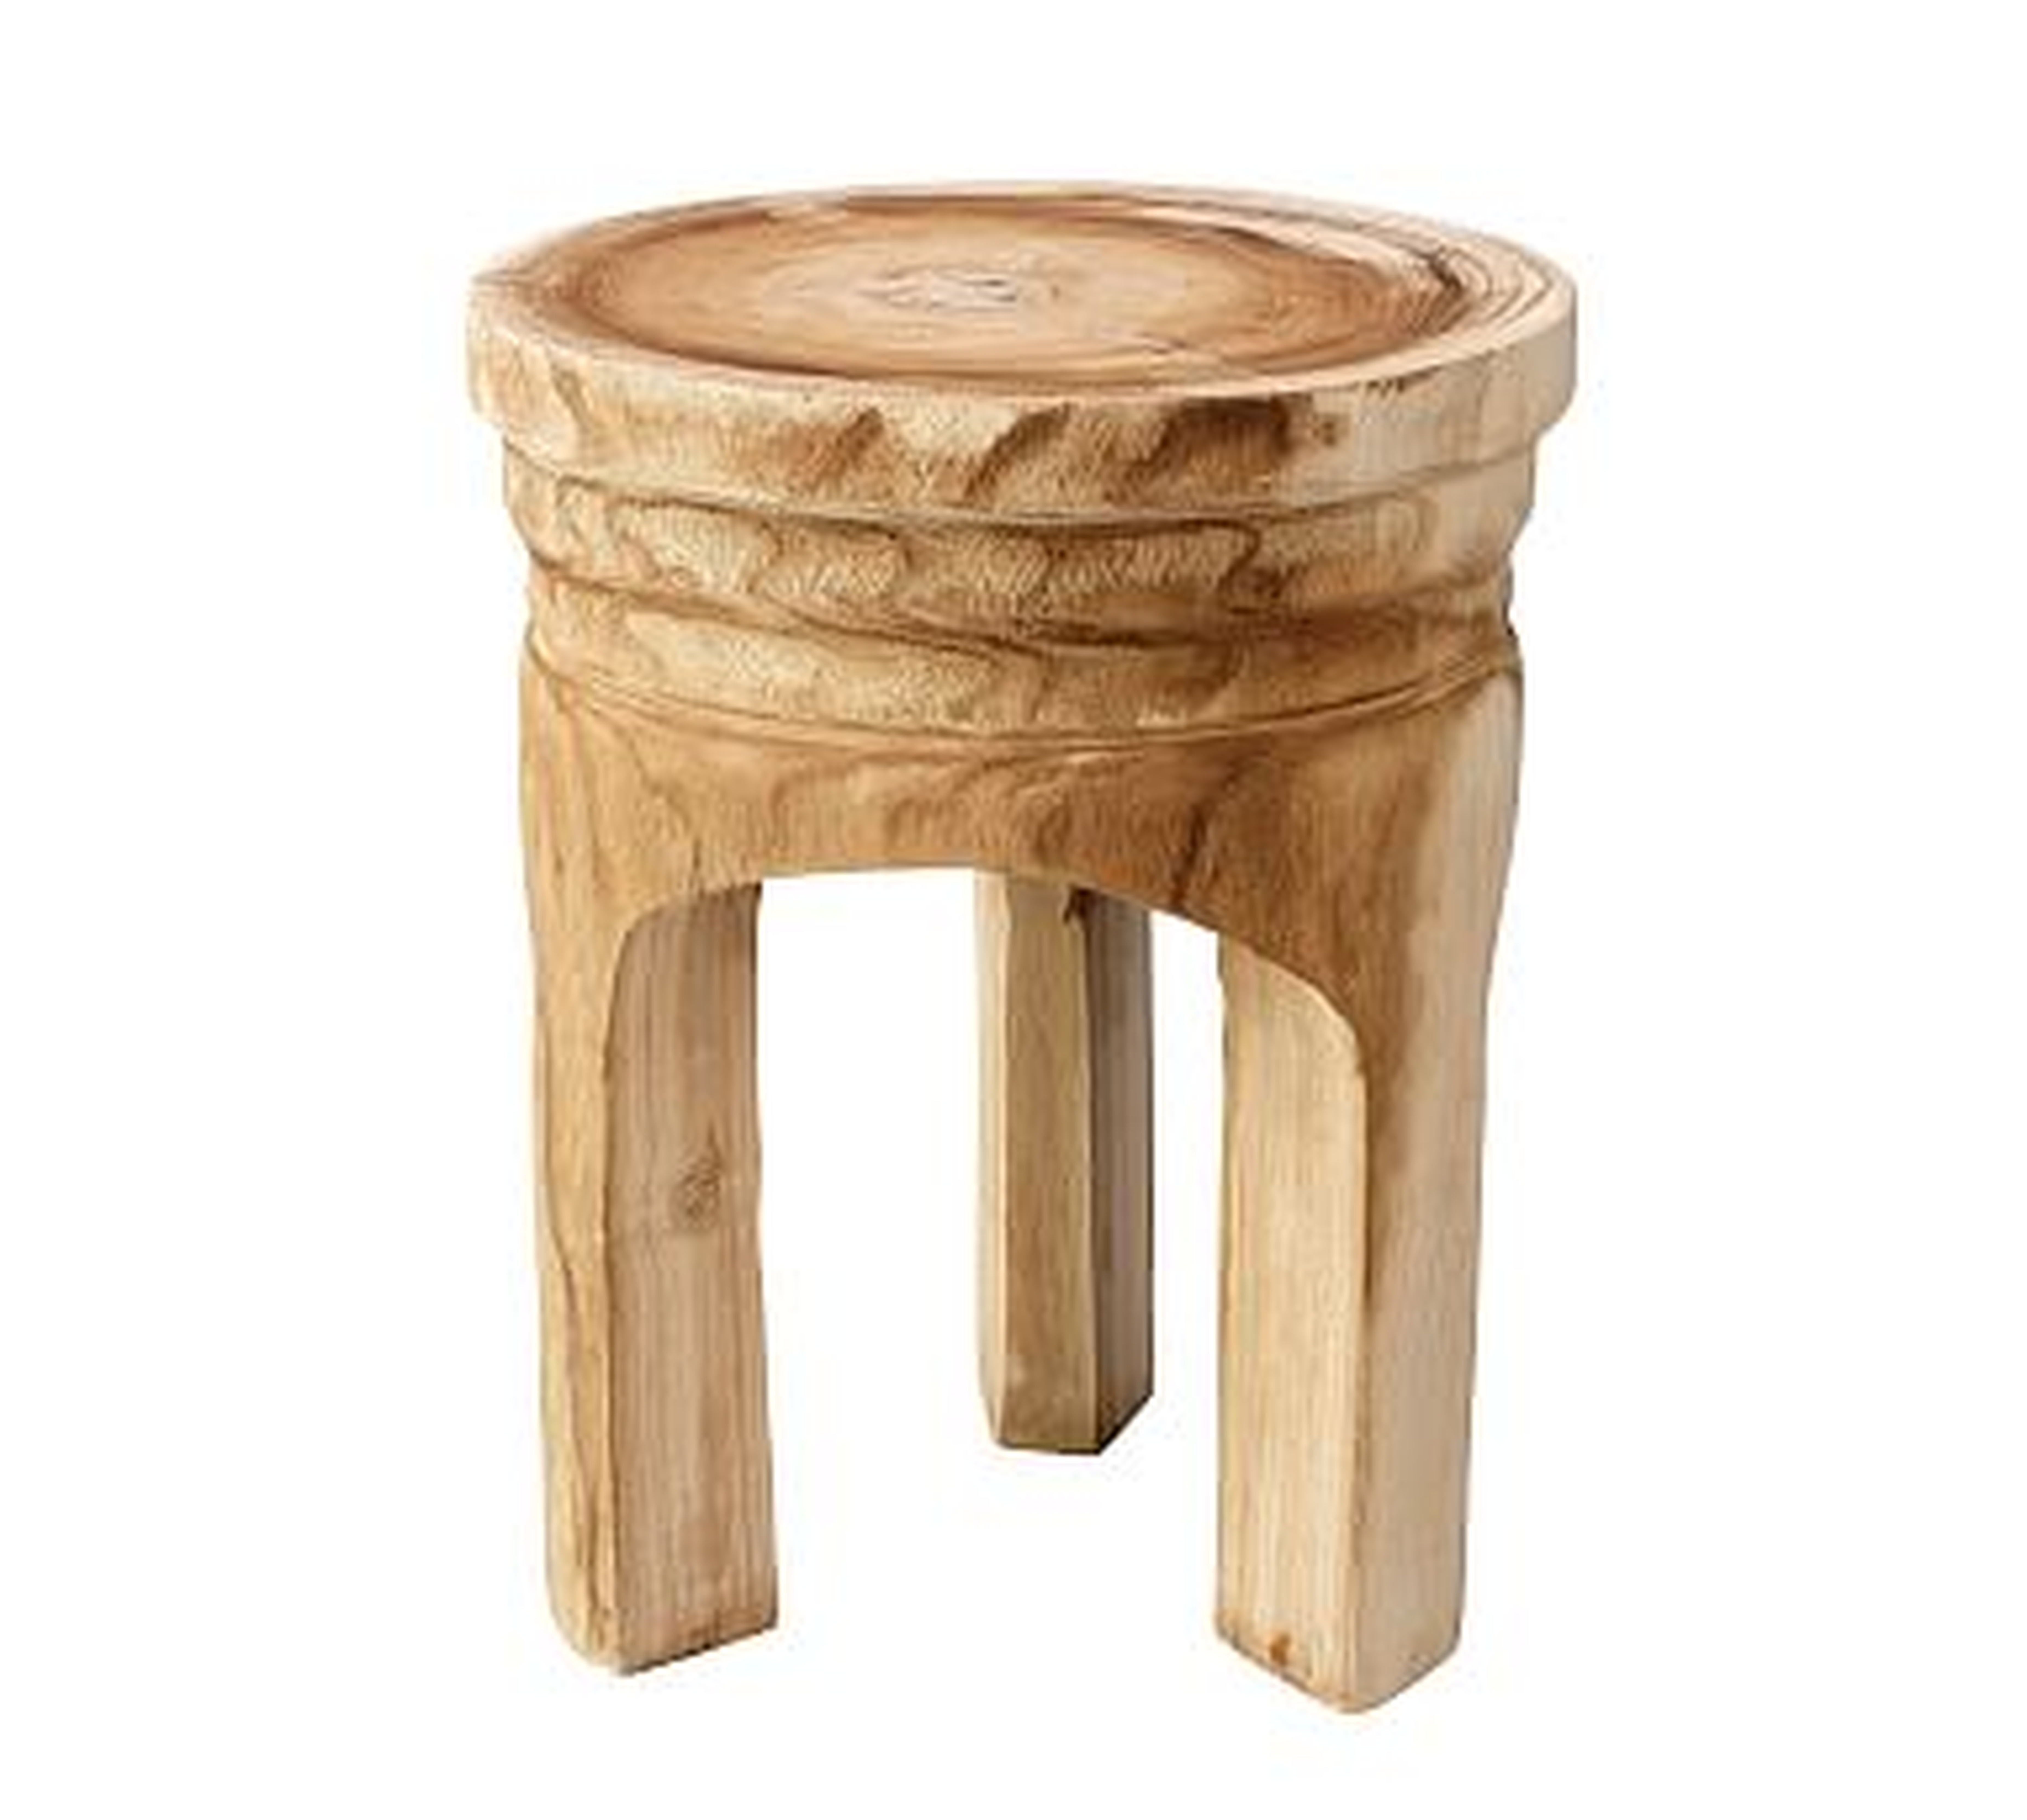 Roselle Wood Accent Stool, Natural - Pottery Barn